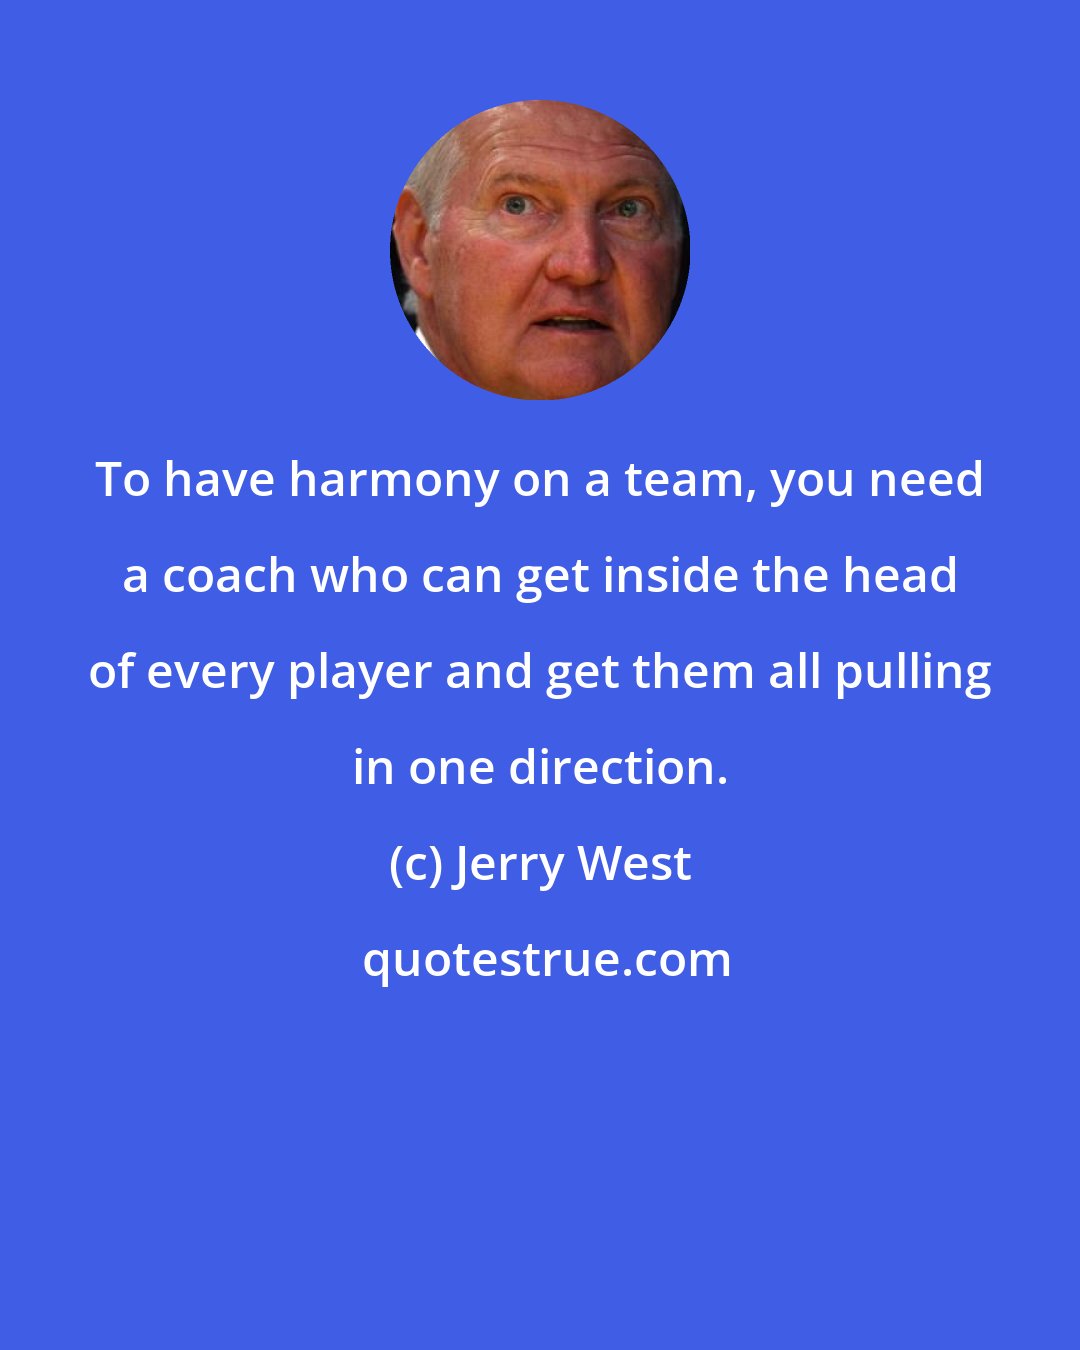 Jerry West: To have harmony on a team, you need a coach who can get inside the head of every player and get them all pulling in one direction.